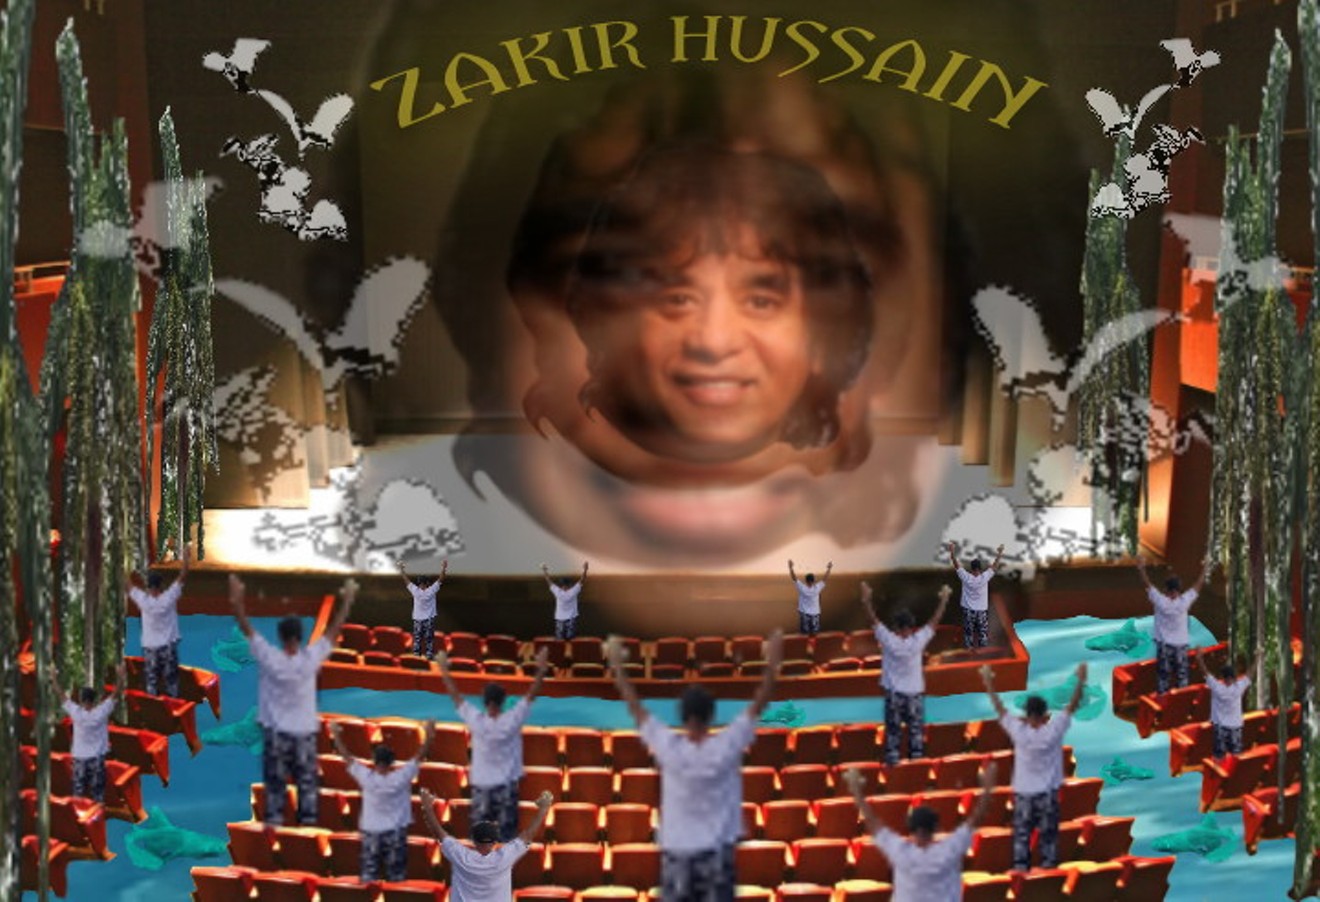 An image of me worshiping at the Church of Zakir, created by AholSniffsGlue during our interview.